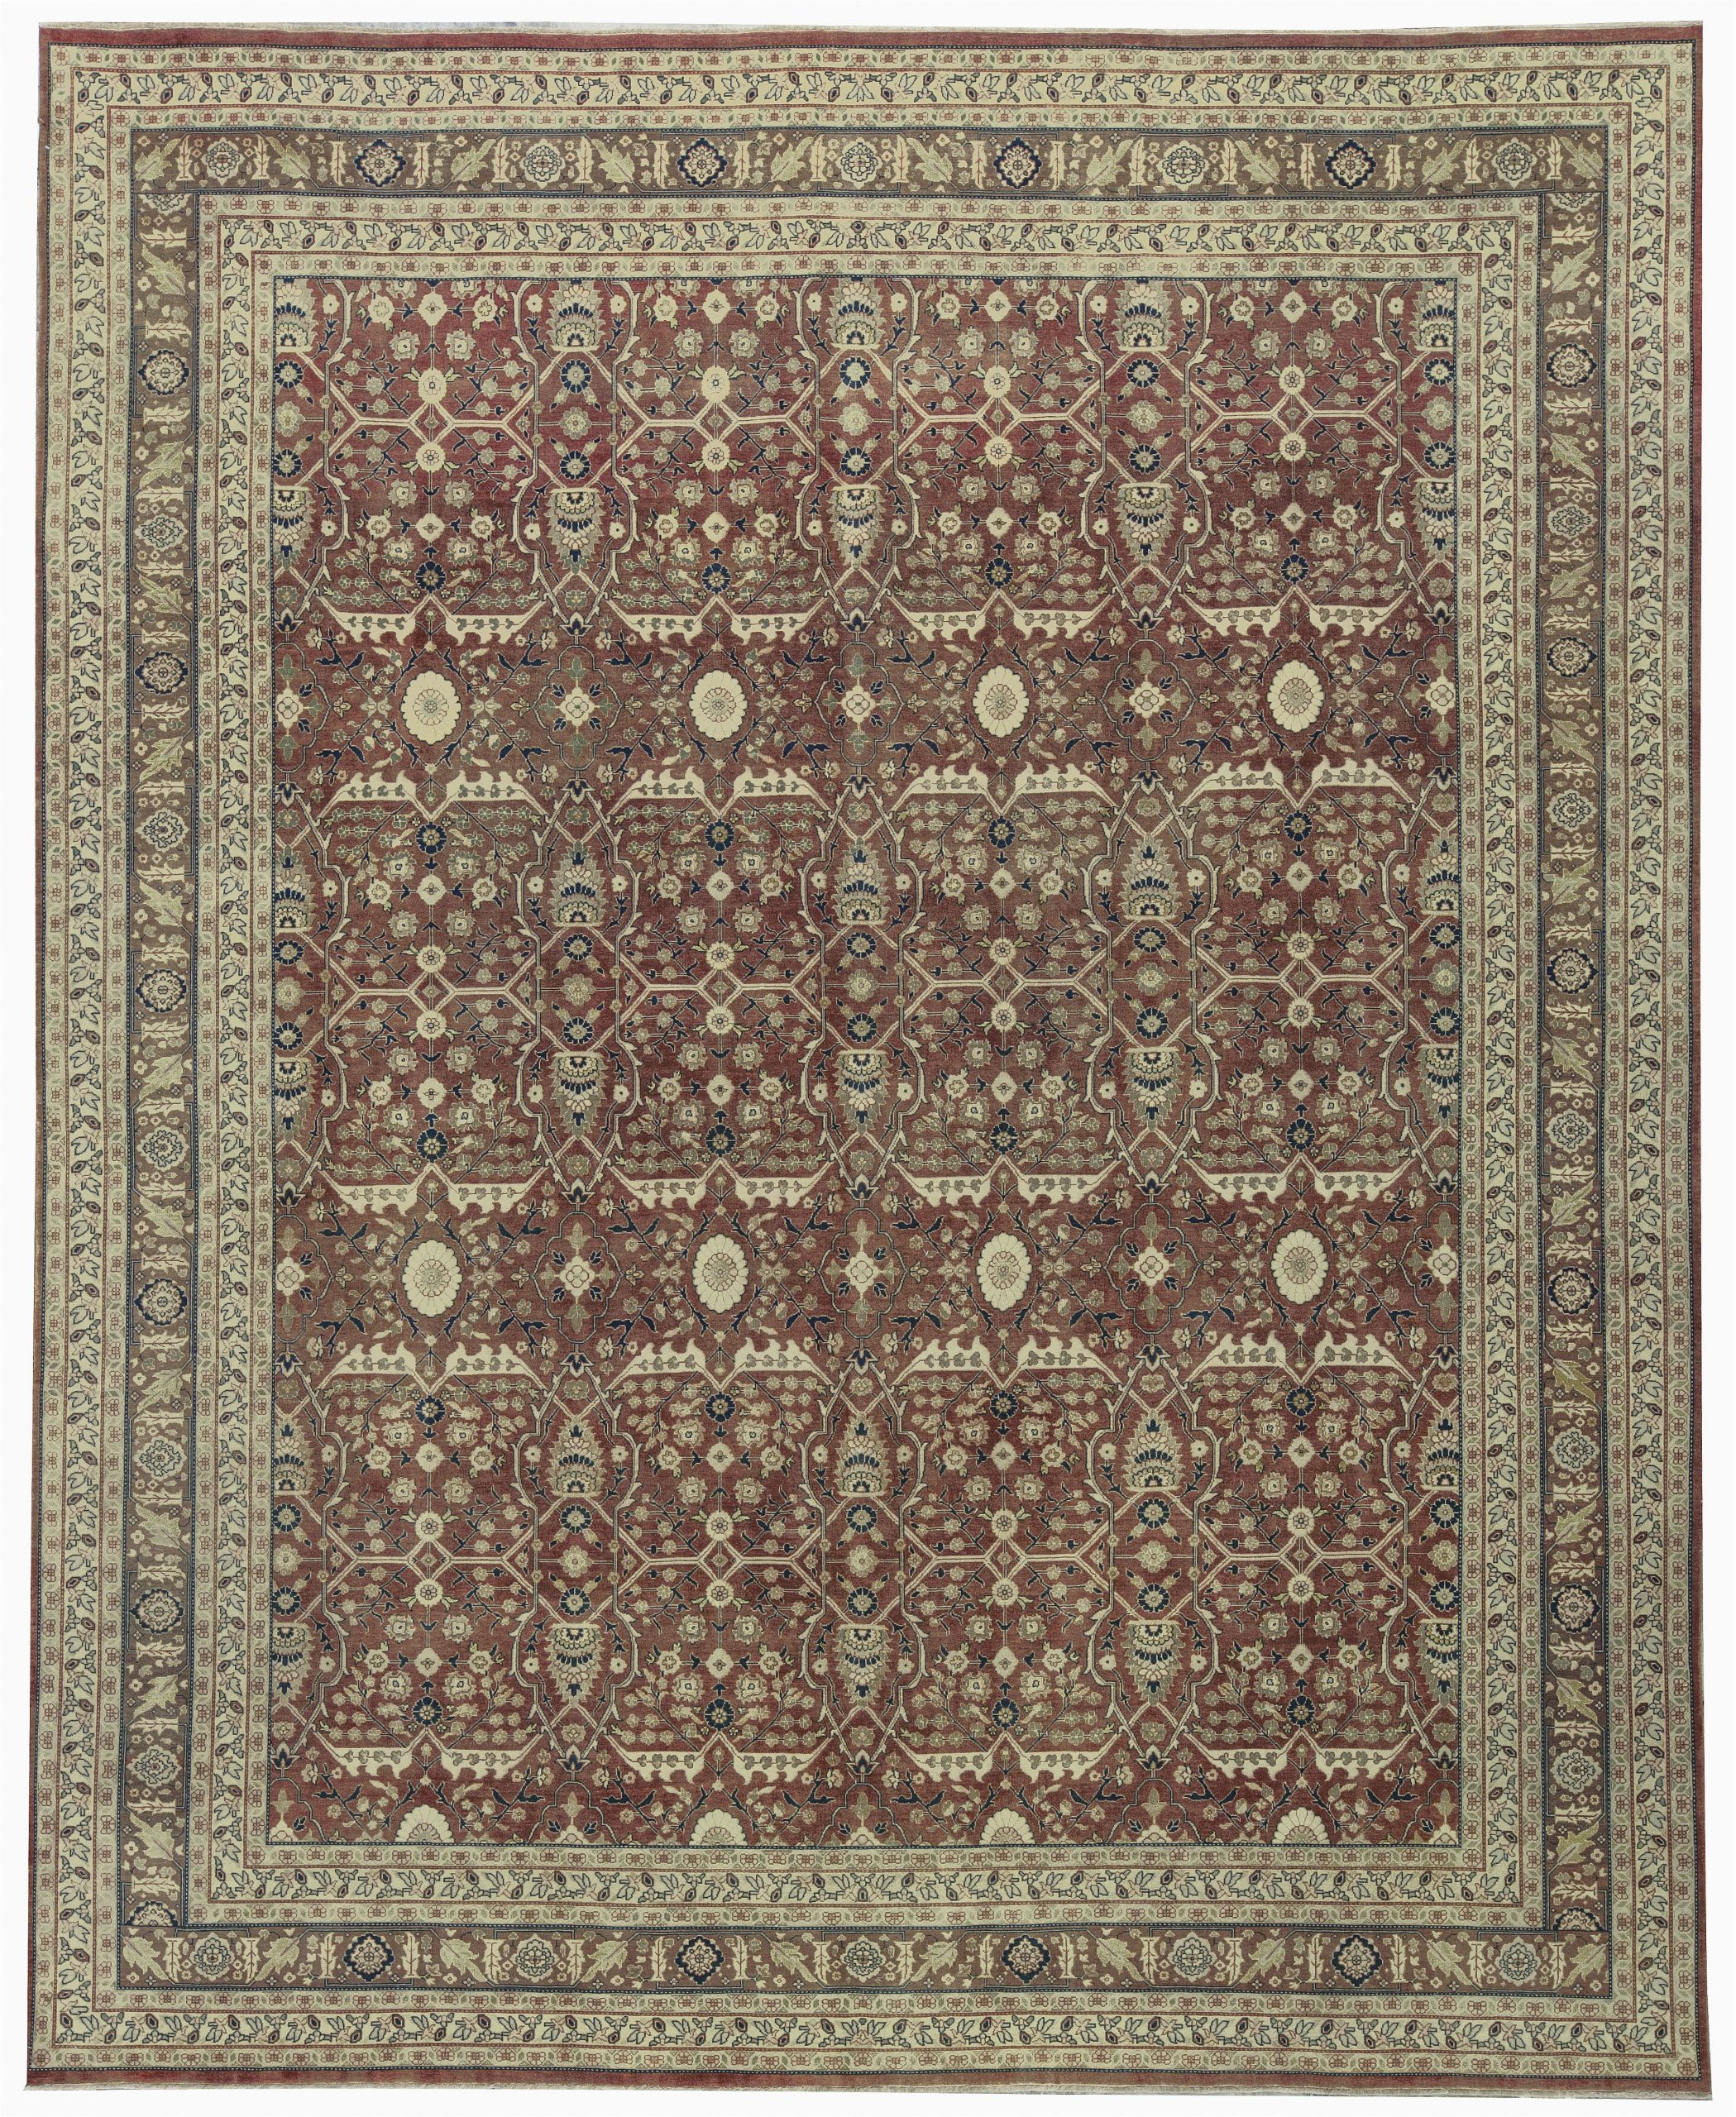 11 by 11 area Rug E Of A Kind Serapi Antique Handwoven 11 11" X 14 11" Wool Red Ivory area Rug